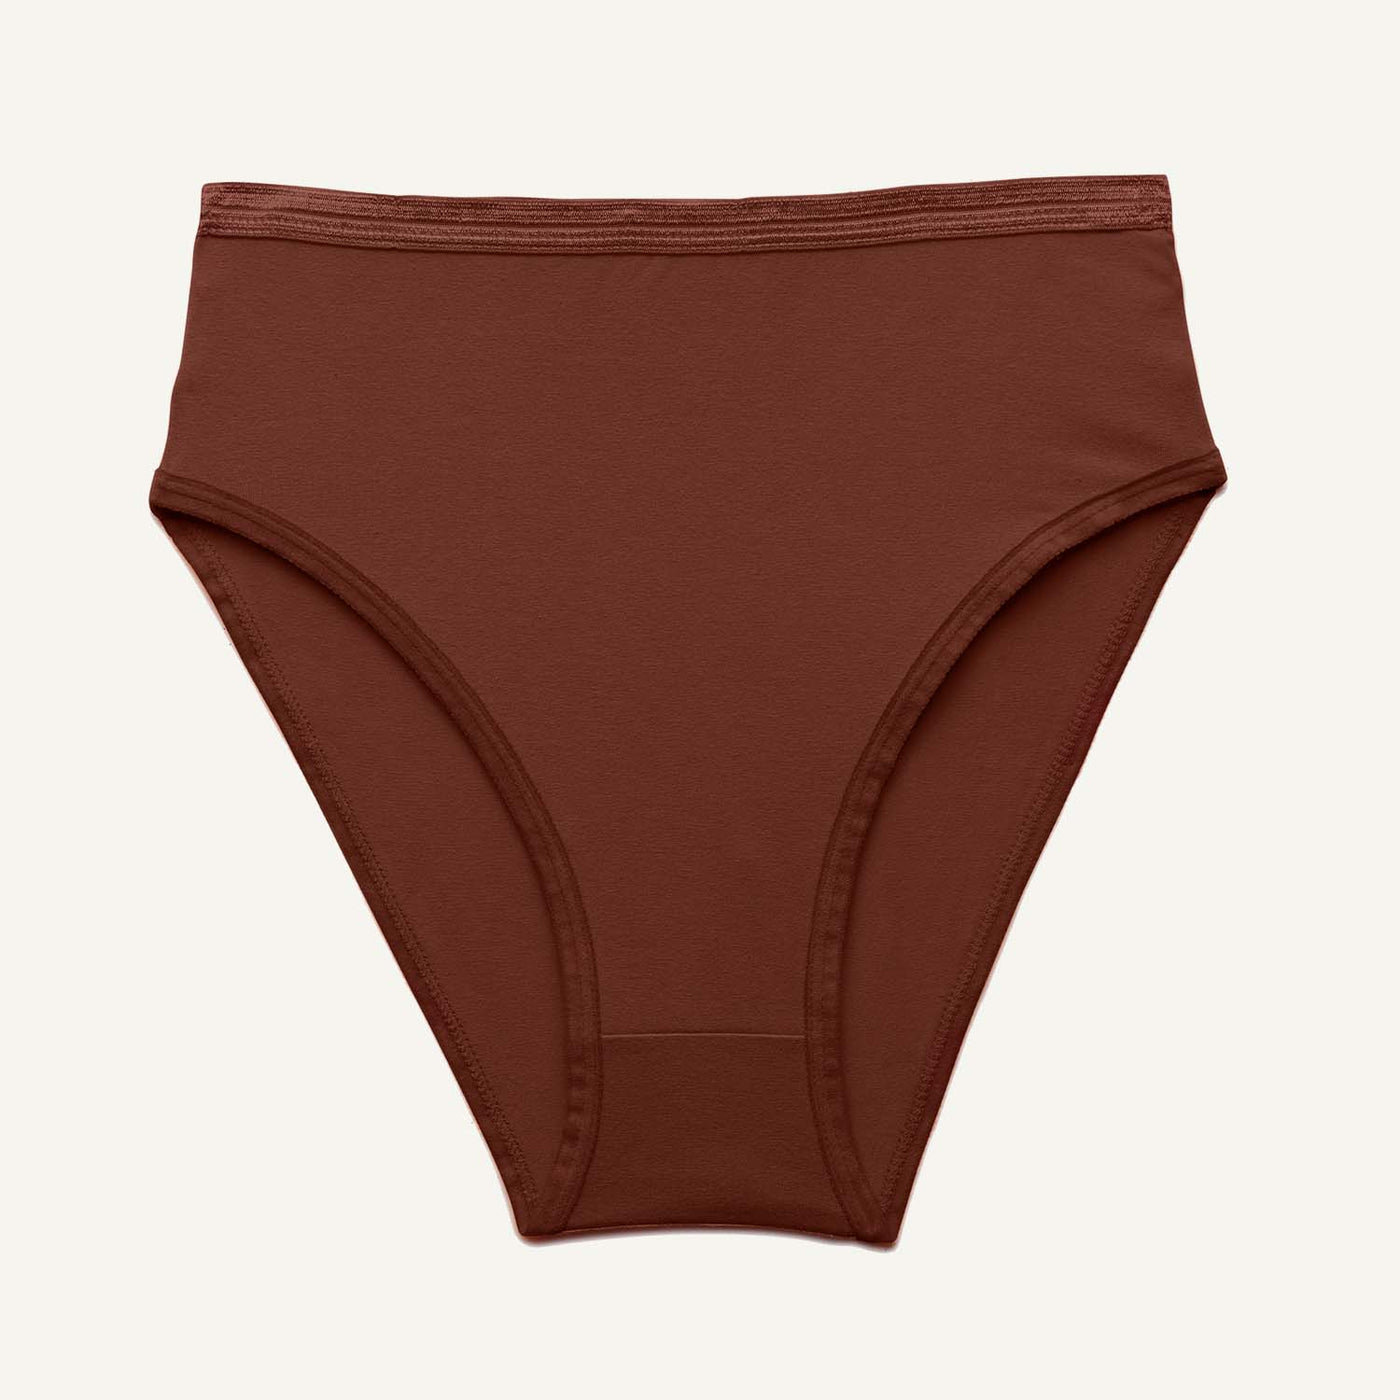 Organic Cotton High-Rise Brief in Cacao